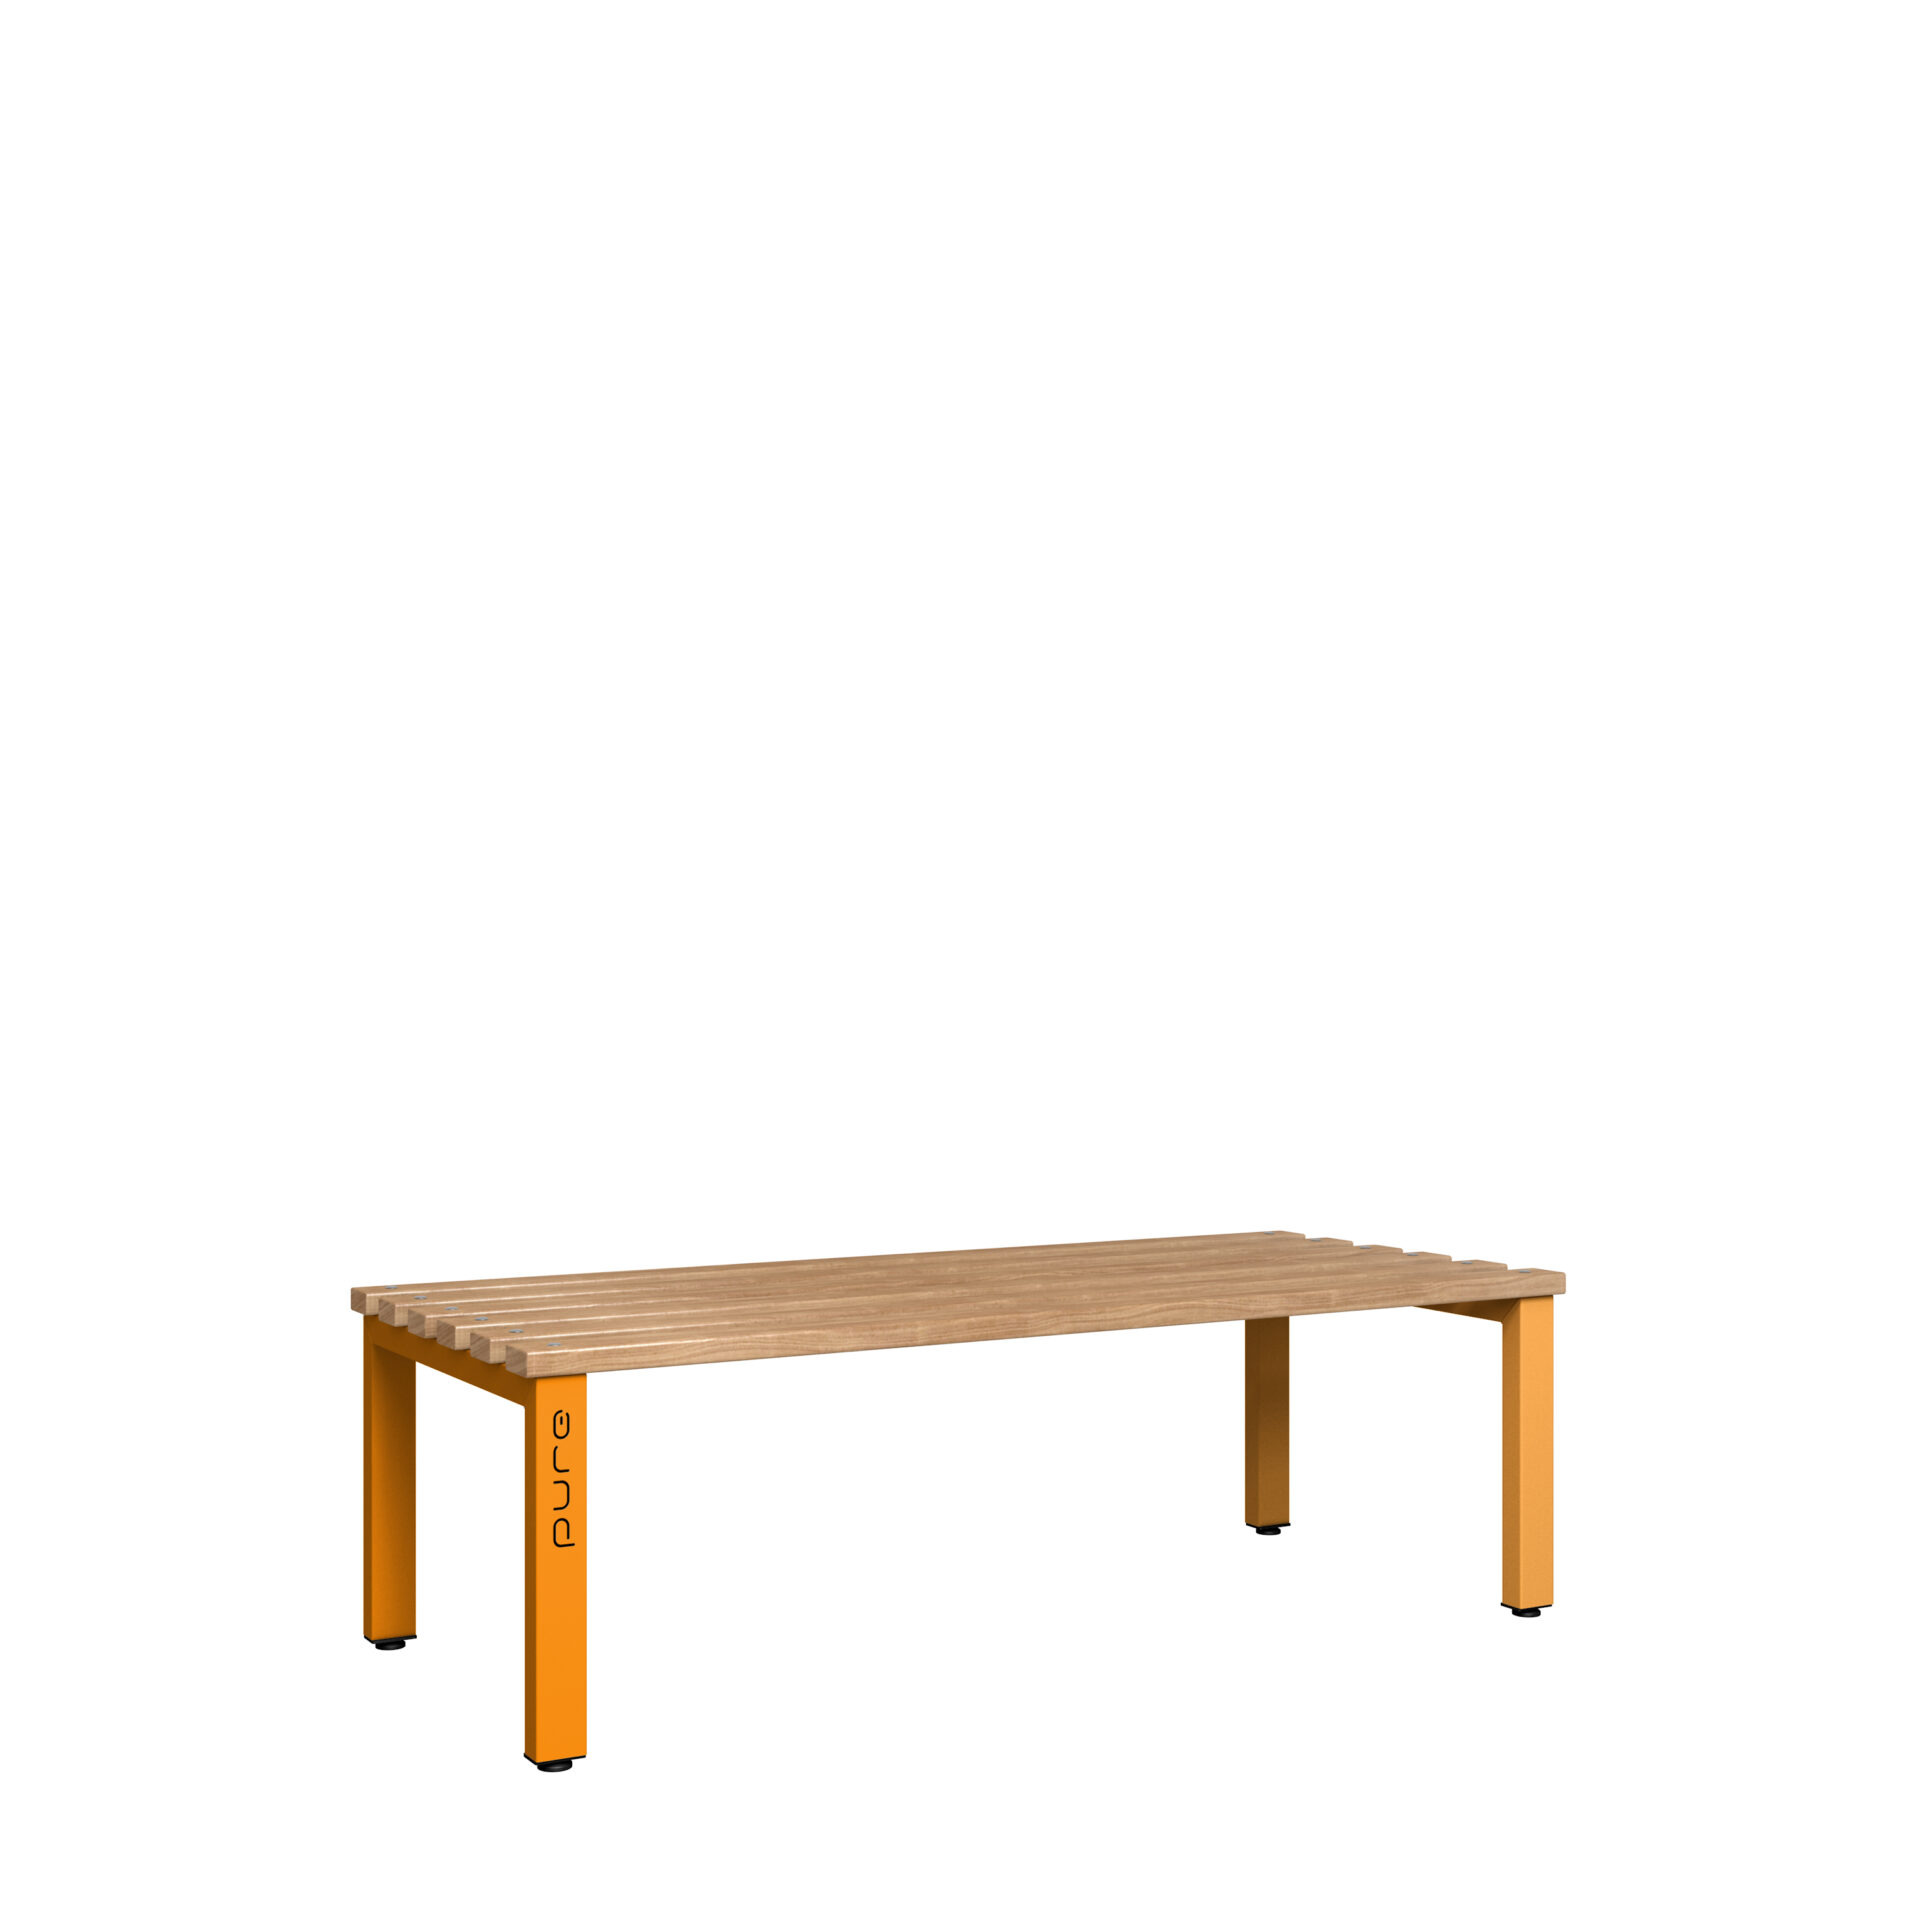 Pure Carbon Zero Double Sided 1500mm Standard Bench - Magma Orange / Solid Timber